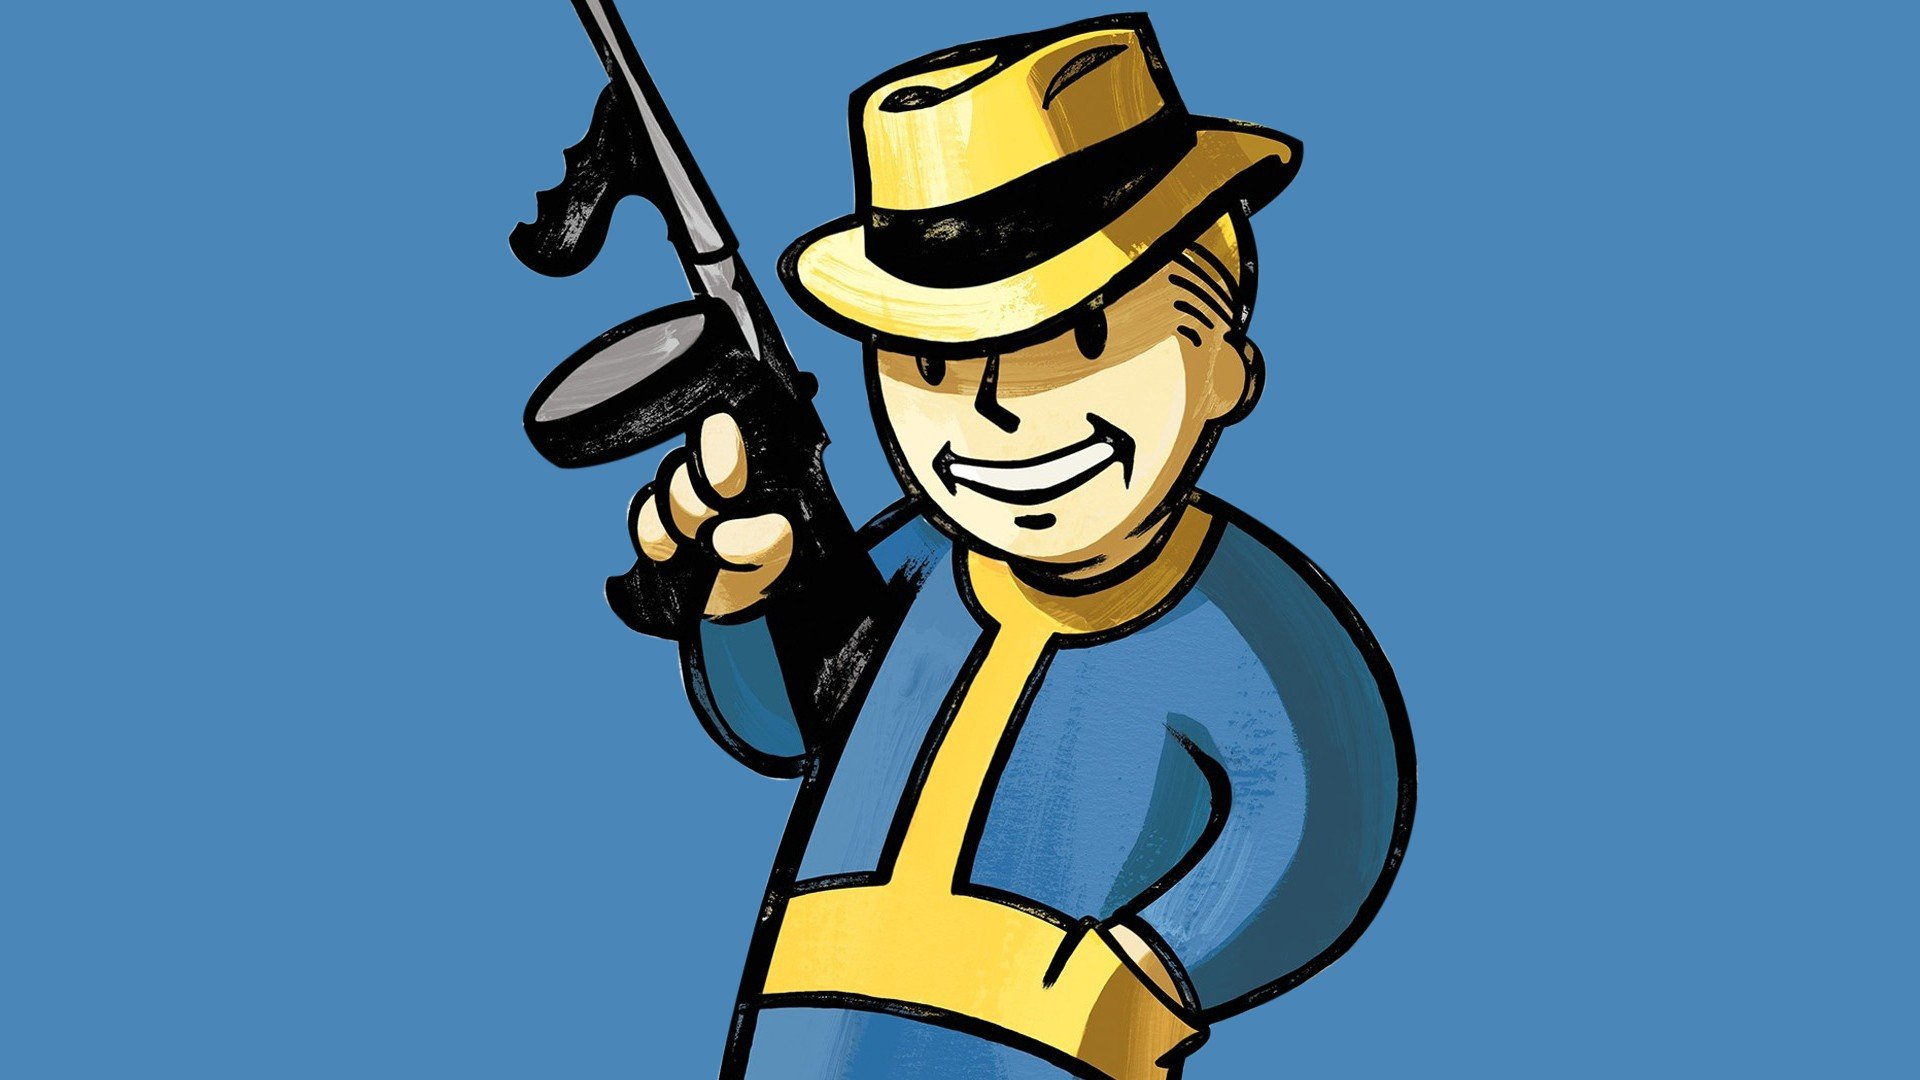 video, Games, Minimalistic, Fallout, Bethesda, Softworks, Pip, Boy, Role, Playing, Game Wallpaper